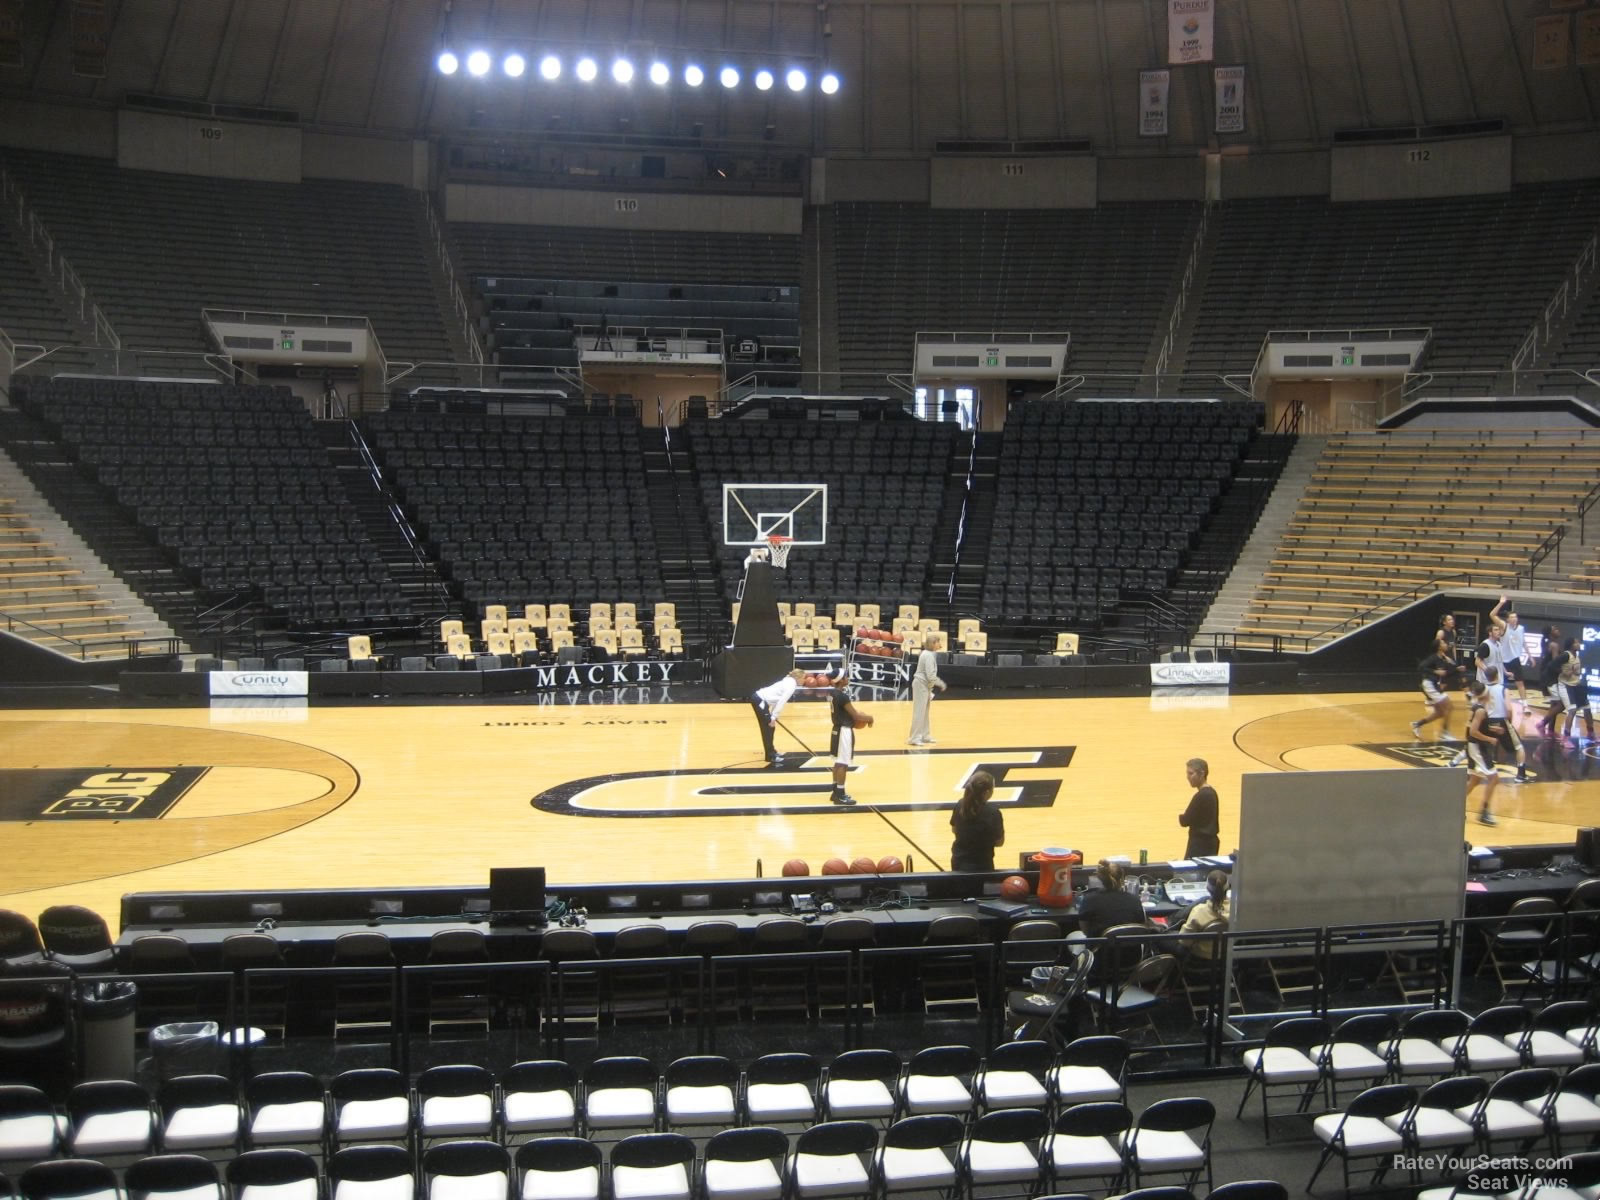 section 1, row 10 seat view  - mackey arena